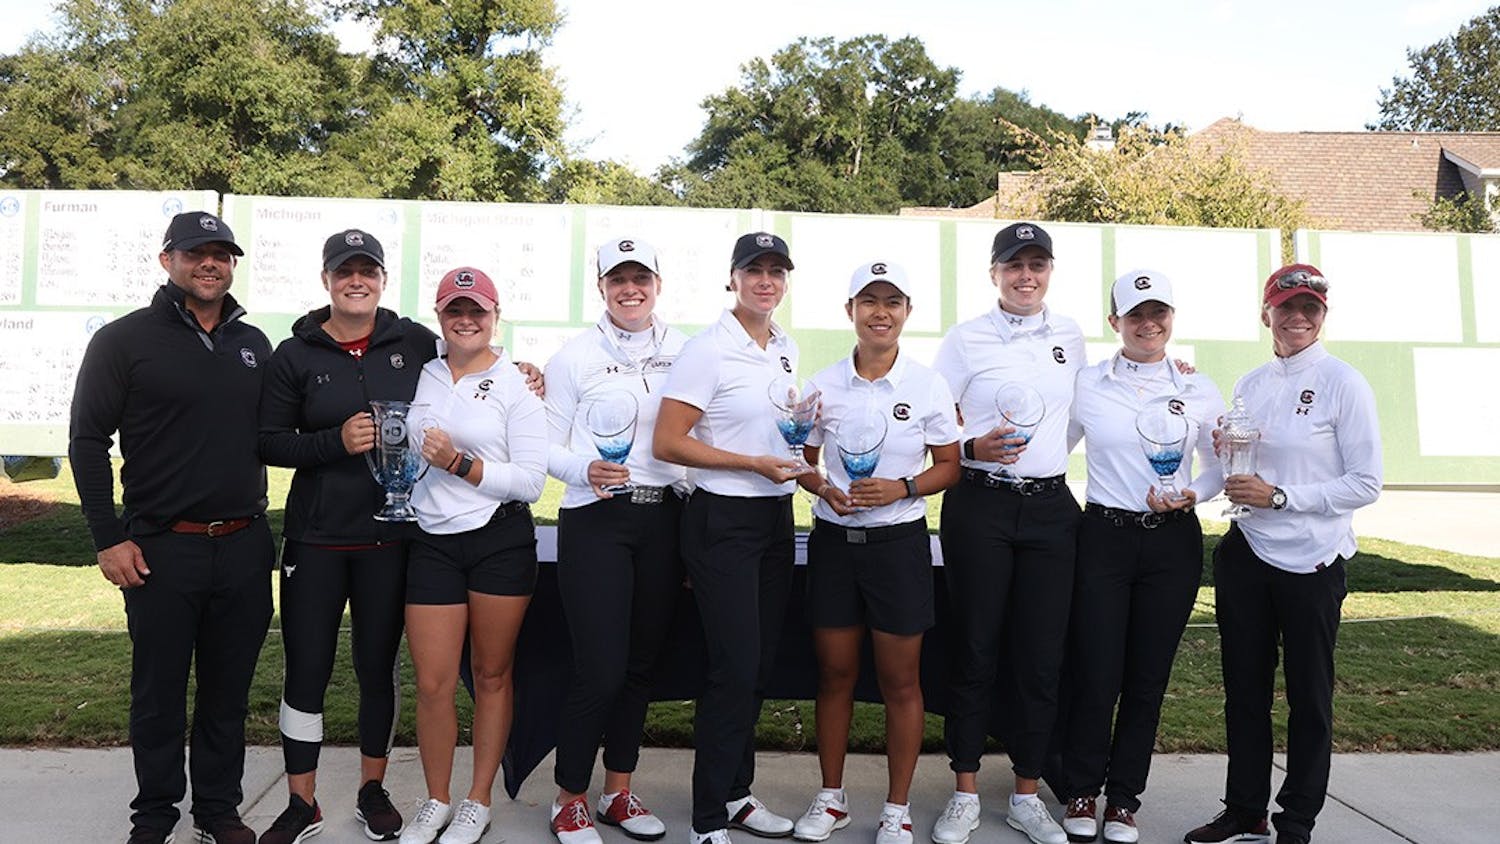 FILE — South Carolina 2021 women's golf team with trophies after the Landfall Tradition Tournament. The team finished its season with two wins, as the No. 3 team in the country and is currently training for the spring season.